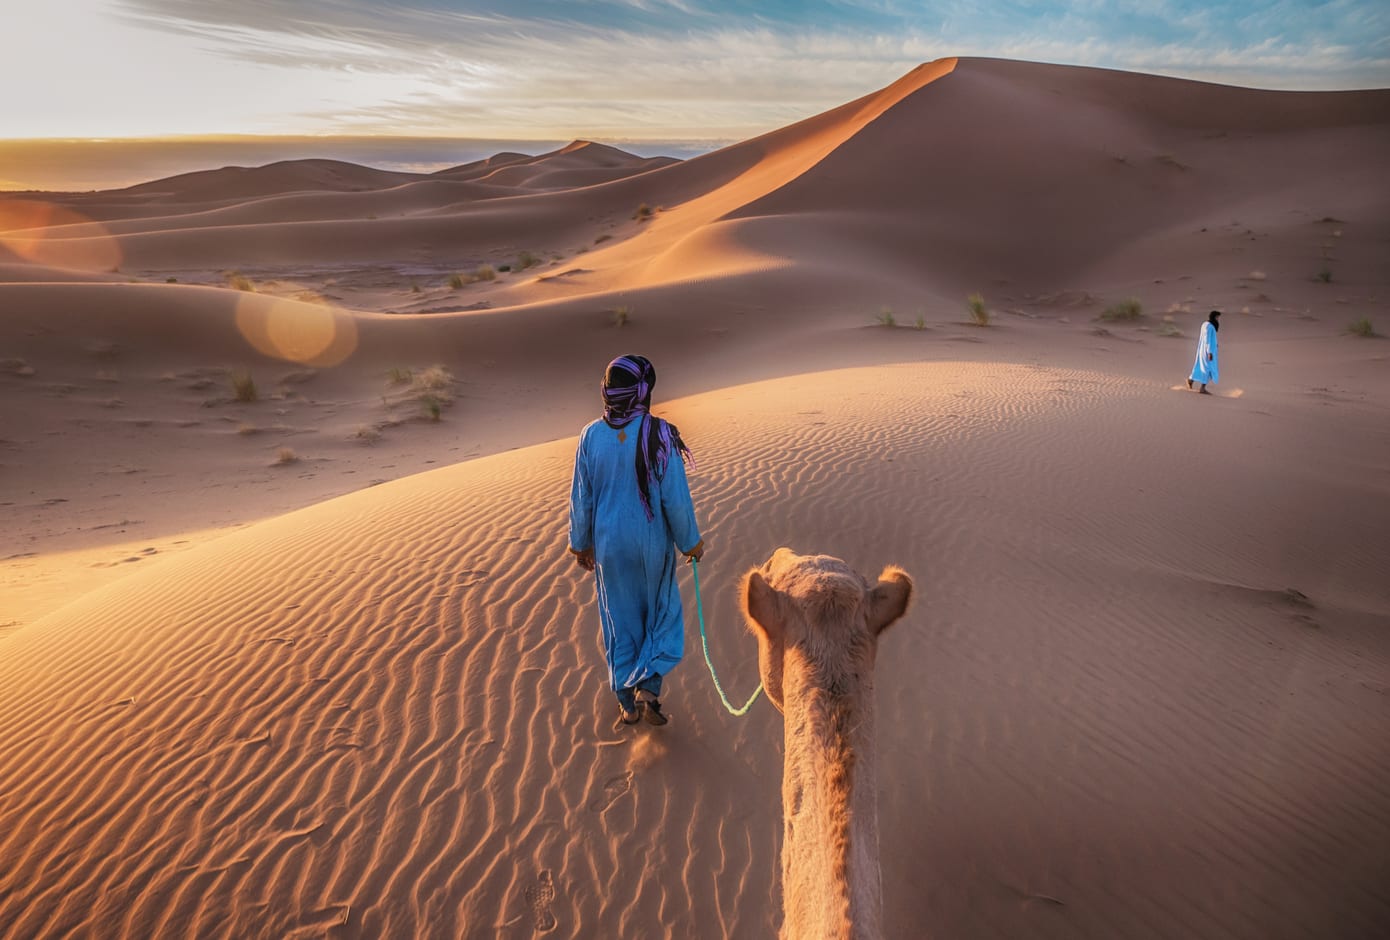 Nomad with camel in the Sahara Desert, Morocco.